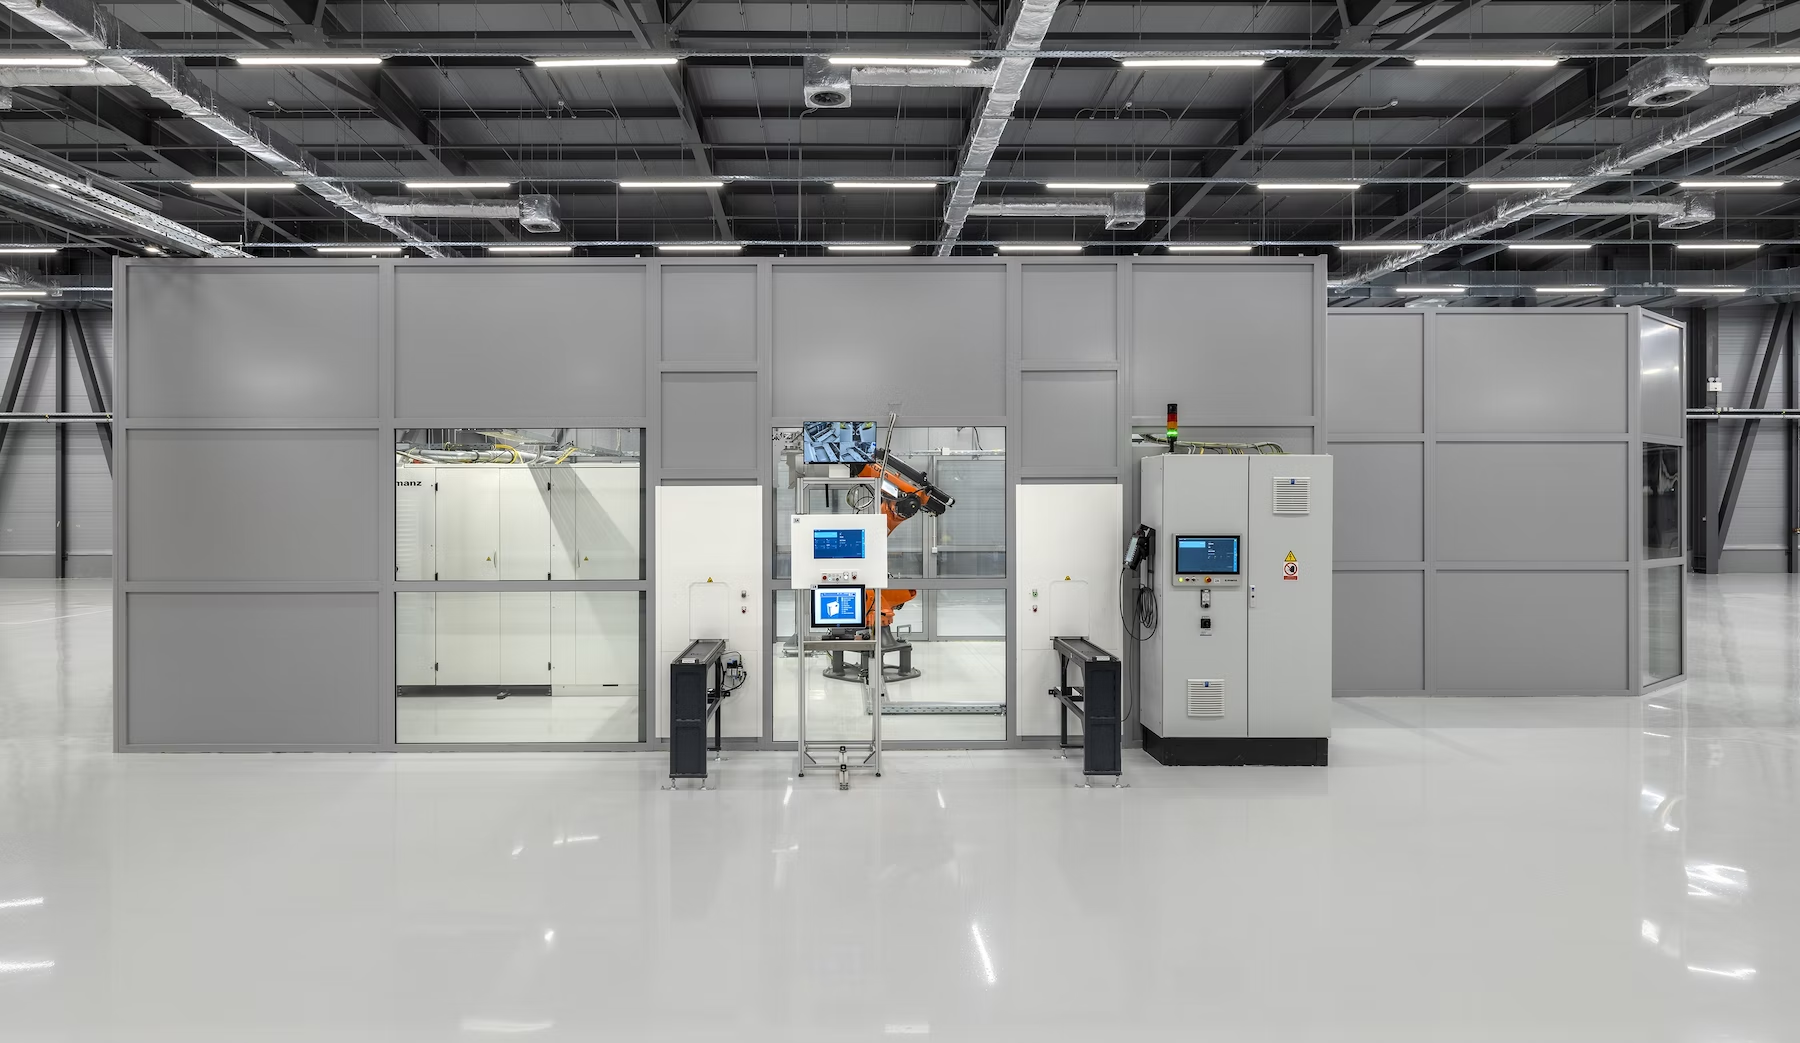  Sunlight Group Increases Lithium-ion Battery Capacity to 3.2gwh with Automatic Production Lines from Manz AG 